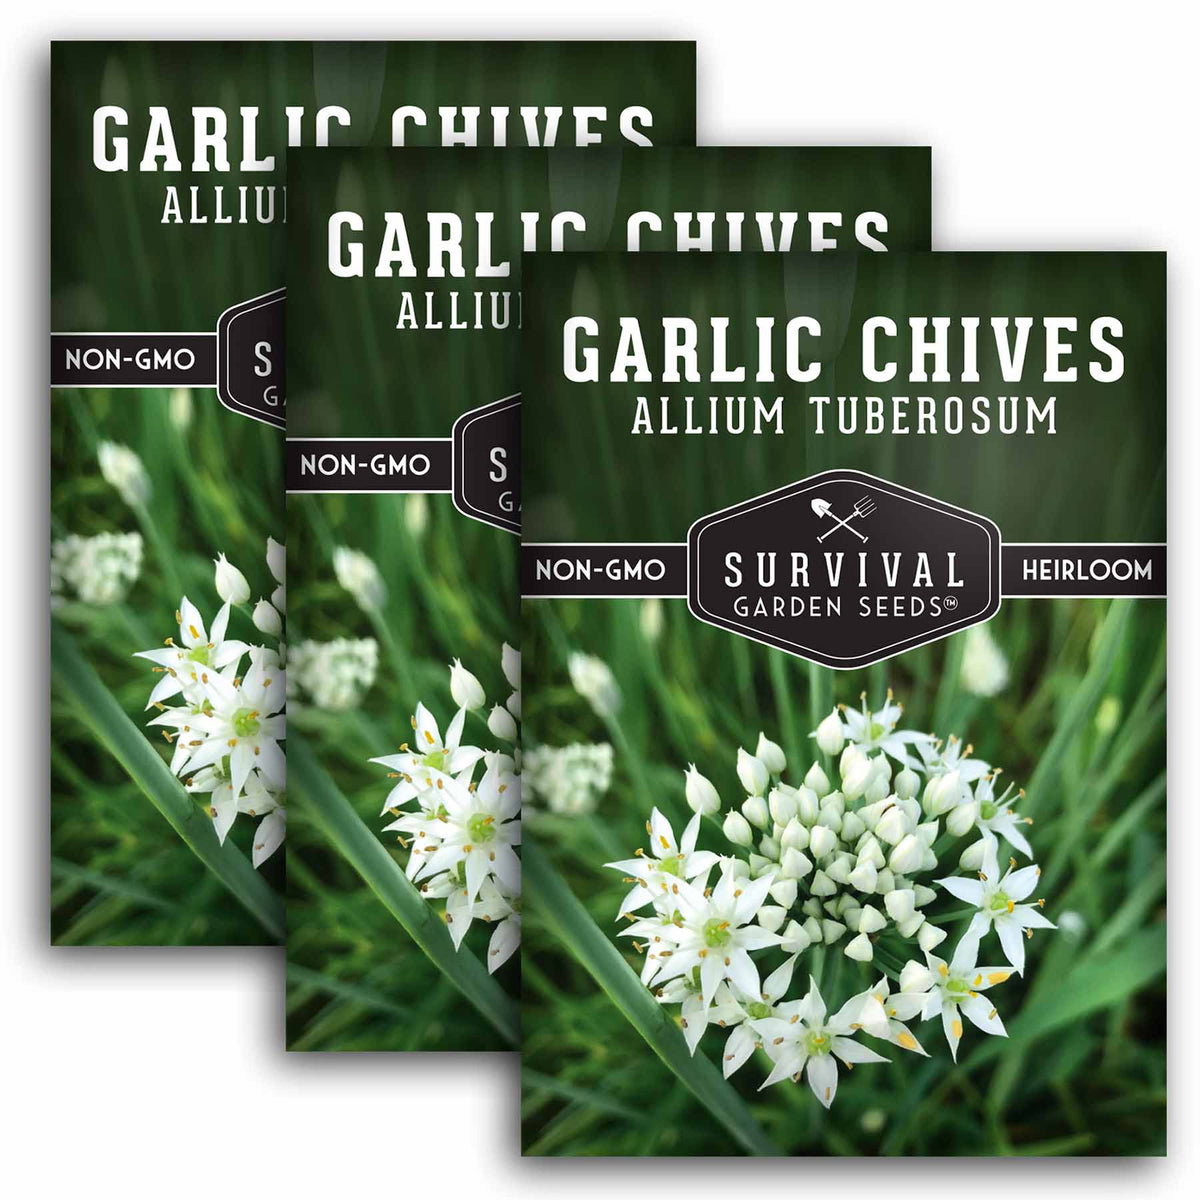 3 packets of Garlic Chives seeds